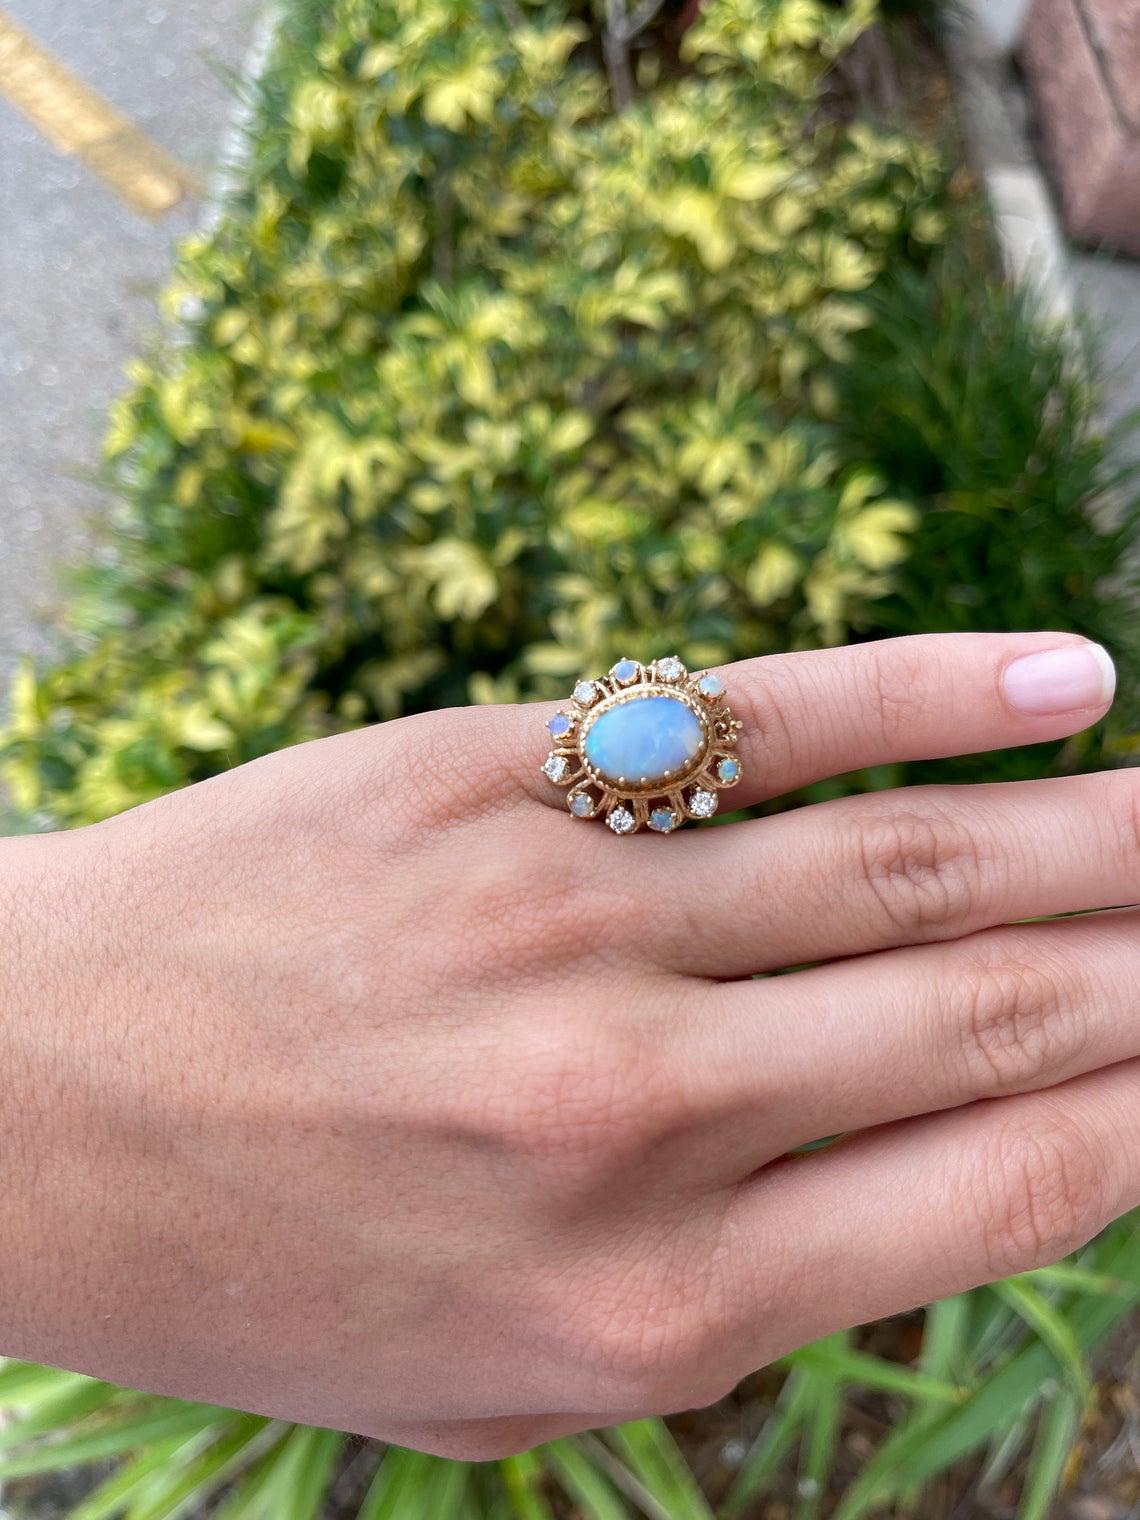 A magnificent, hand made vintage ring from the 1920's with extraordinary opals and diamonds. This grand piece is as impressive as it is beautiful. The focal point of the ring is a crystal opal displaying illuminating rays of fire and brilliance. The